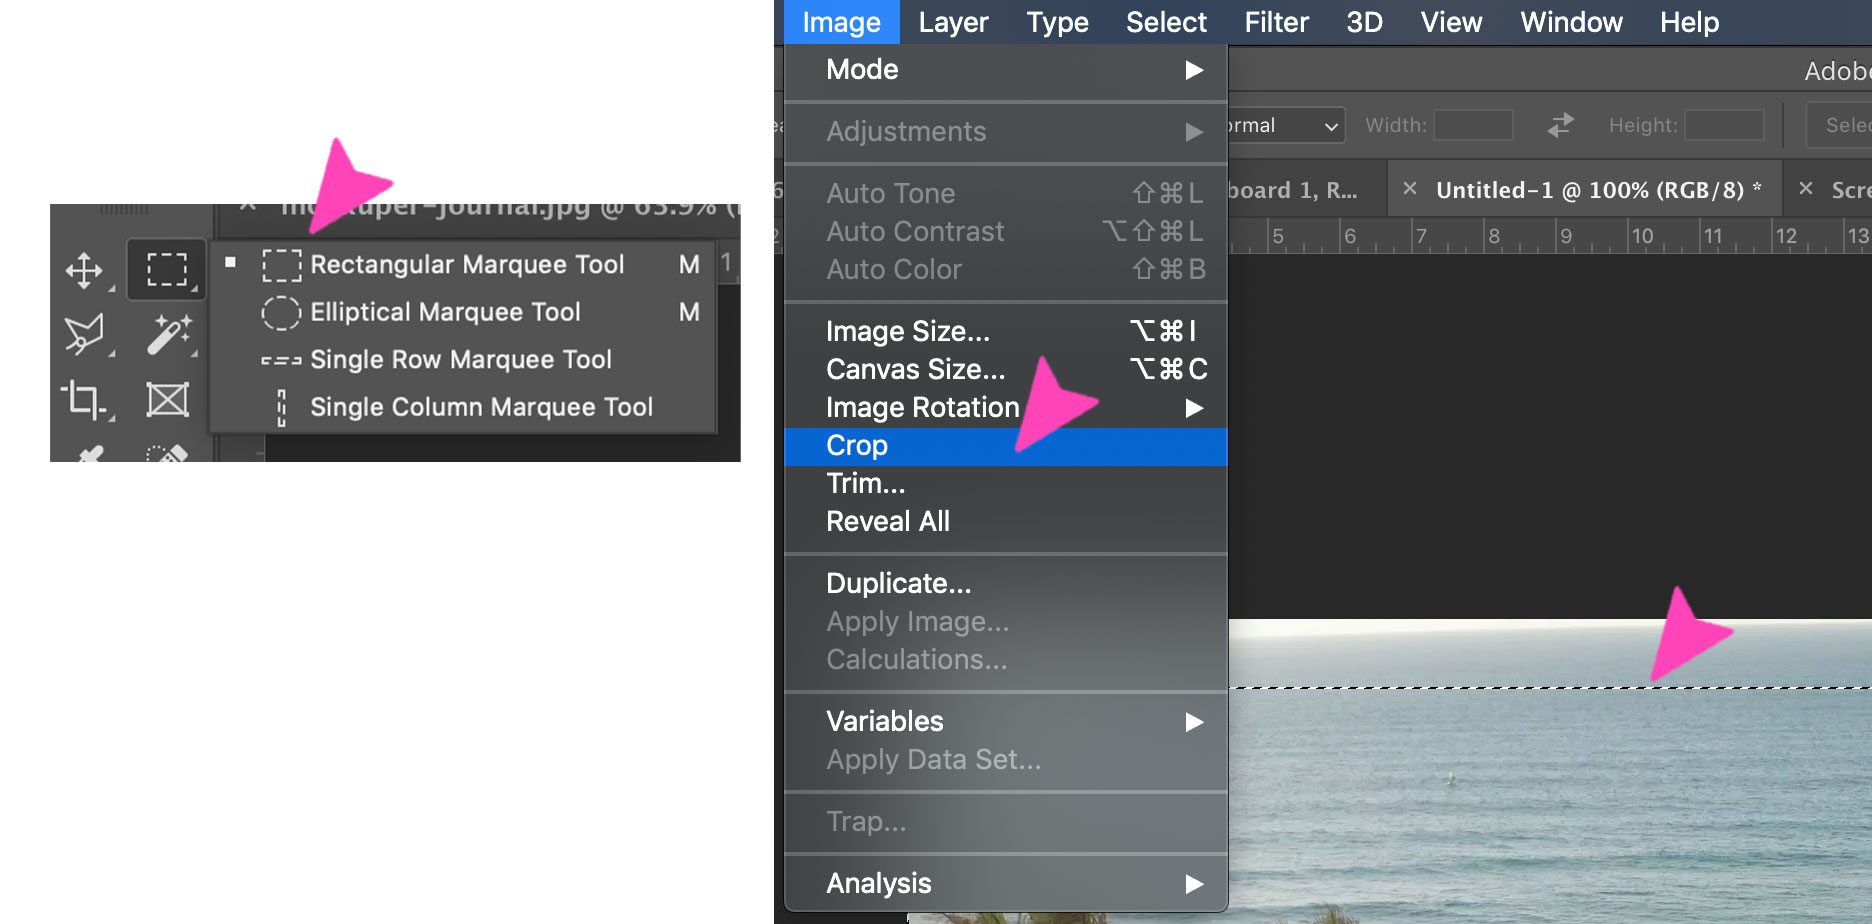 The Ultimate Guide To Turning Videos Into GIFs With Adobe Photoshop